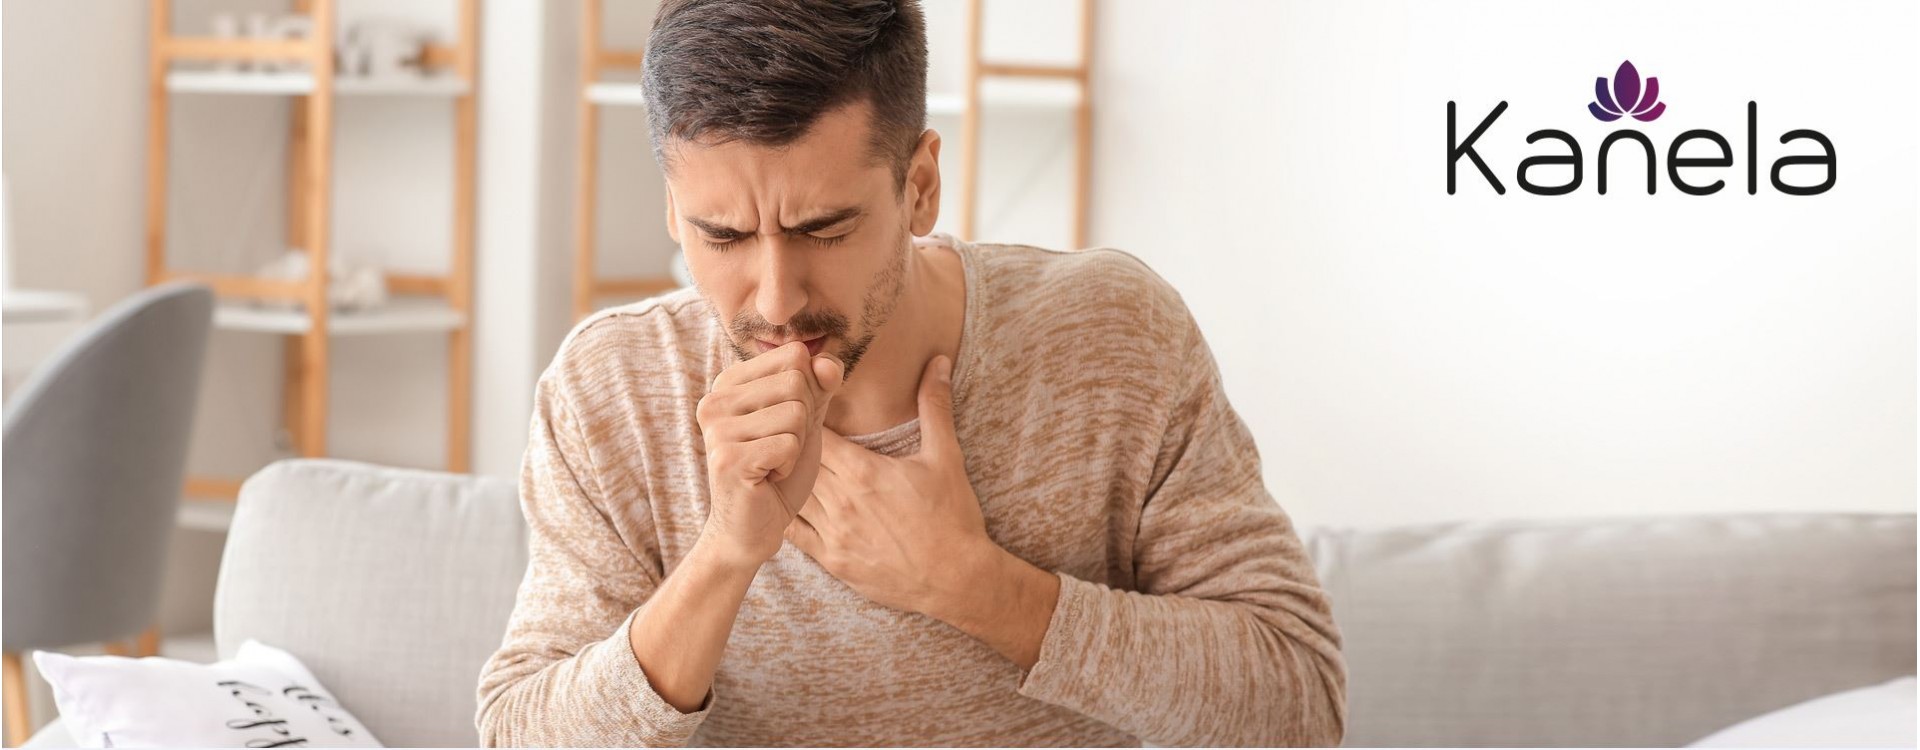 What can be done against dry coughs?